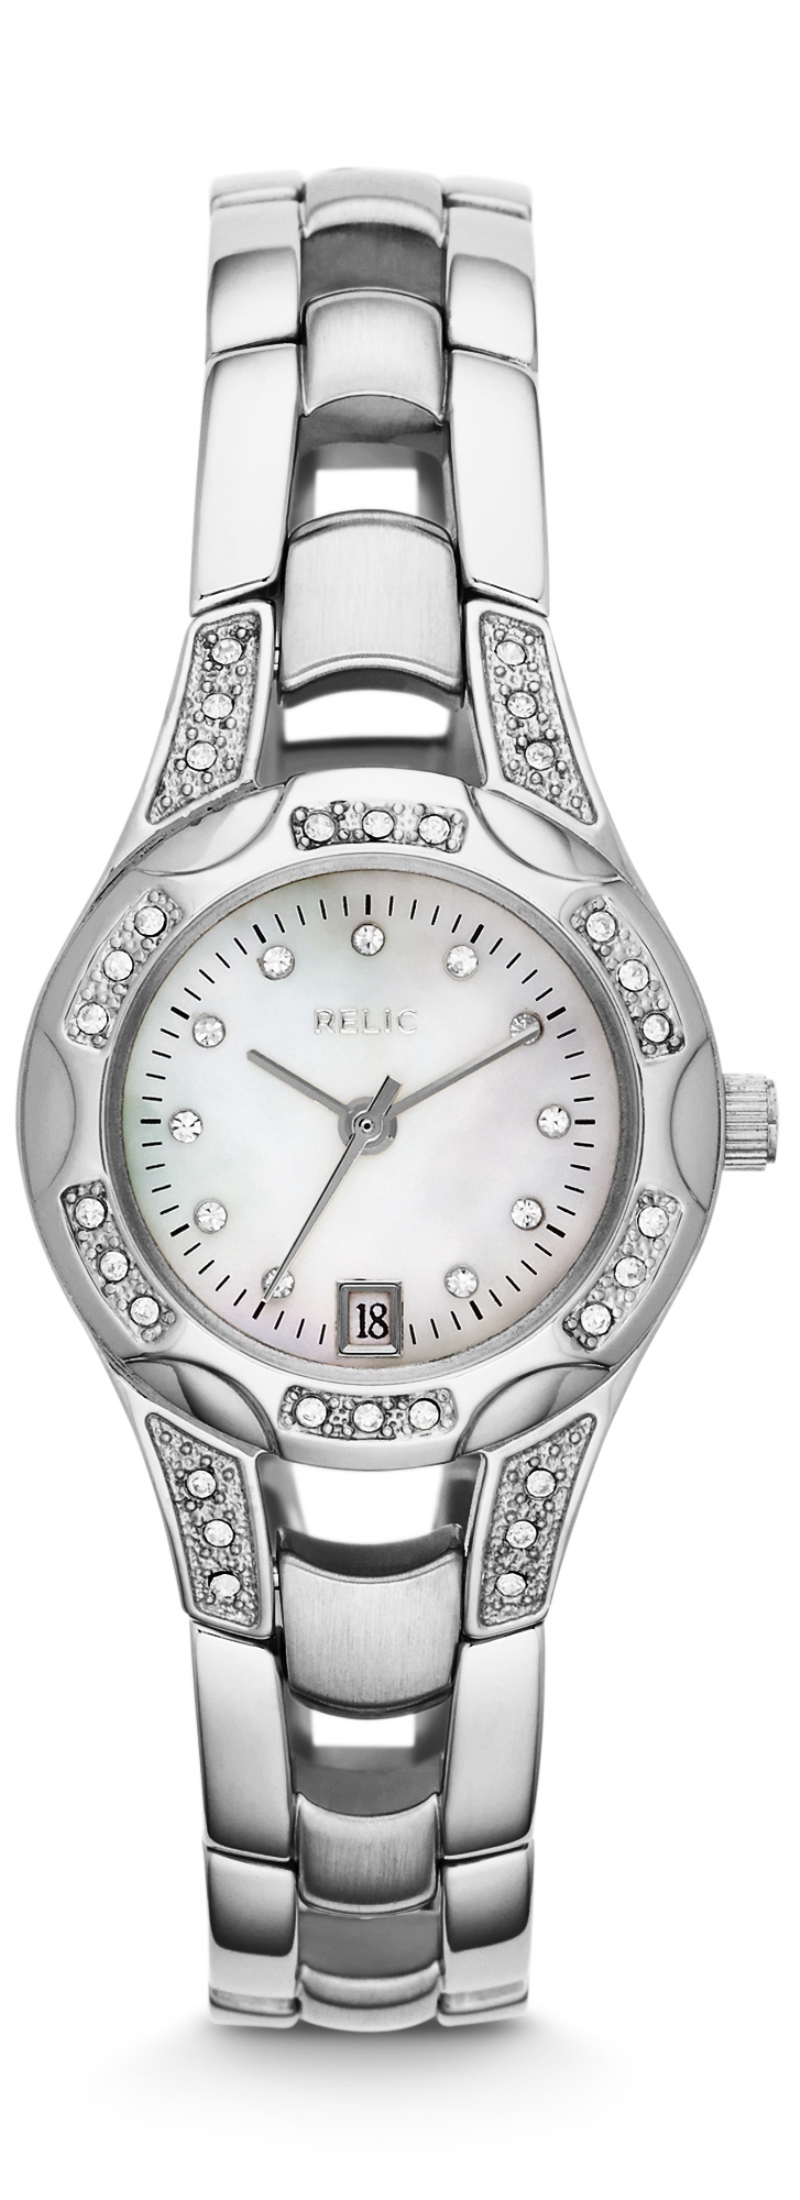 UPC 723765302928 product image for Ladies Calendar Date Watch with White Mother-of-Pearl Dial and Silver Bracelet | upcitemdb.com